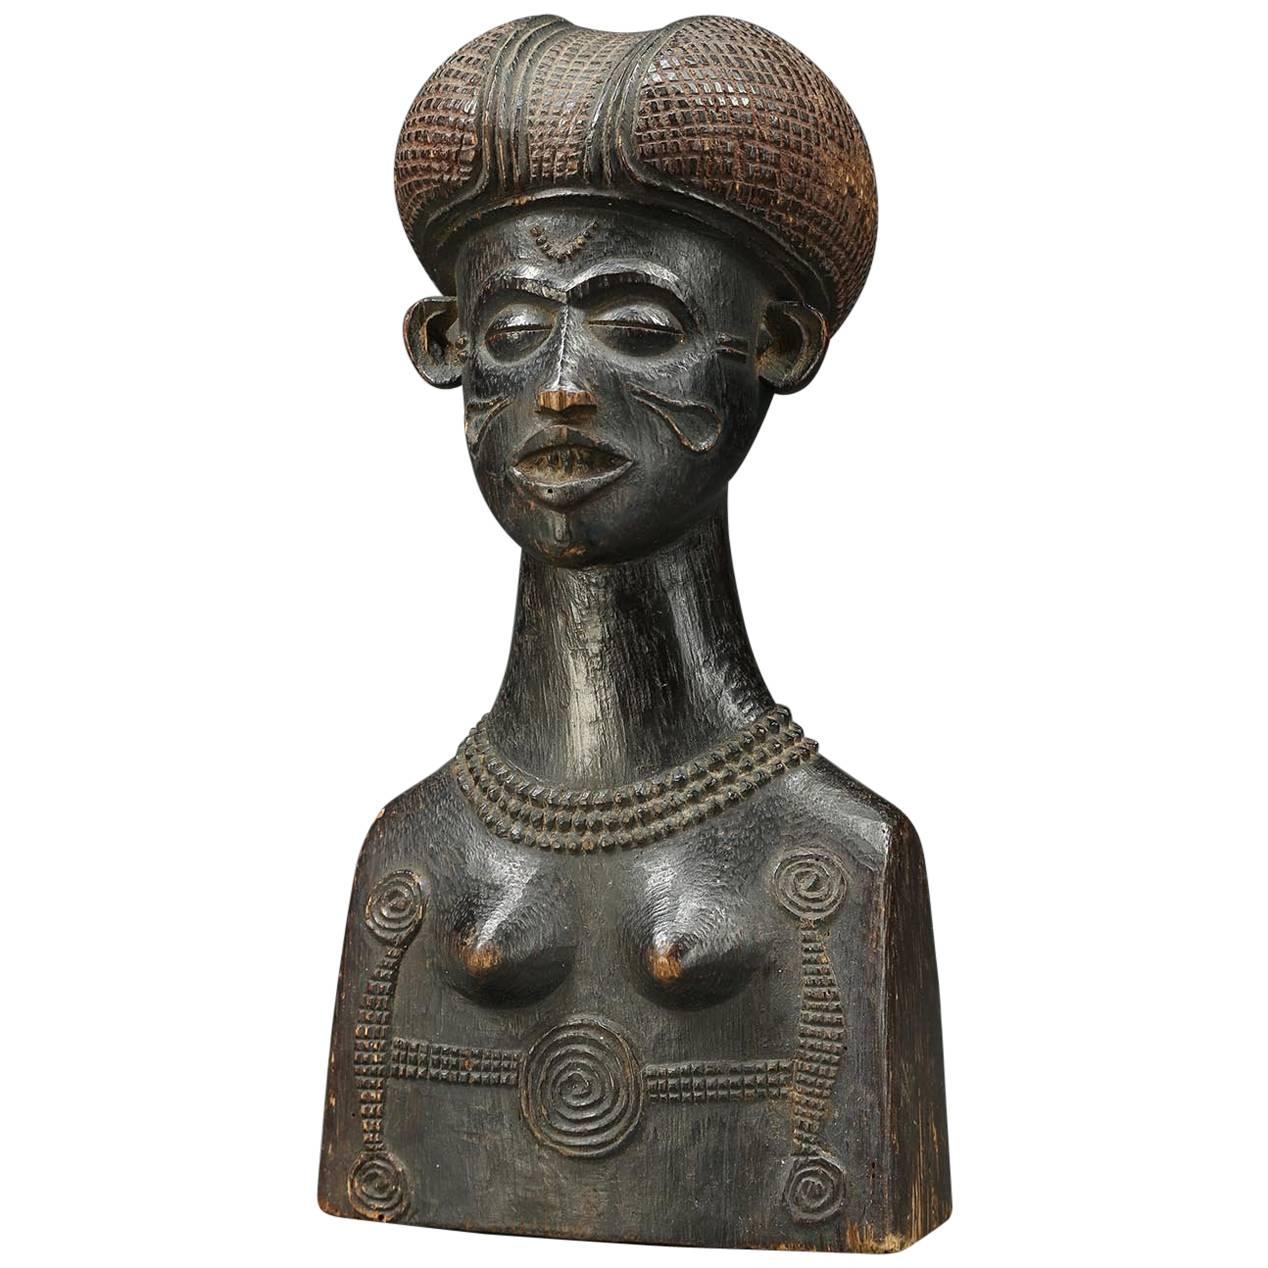 Early Chokwe finely carved wood bust, of a young woman with elaborate scarifications and Classic Chokwe hair style. Probably carved as a bust, sculptor's exhibition piece, early 20th century. Slight chips to nose and wear, 9 1/4